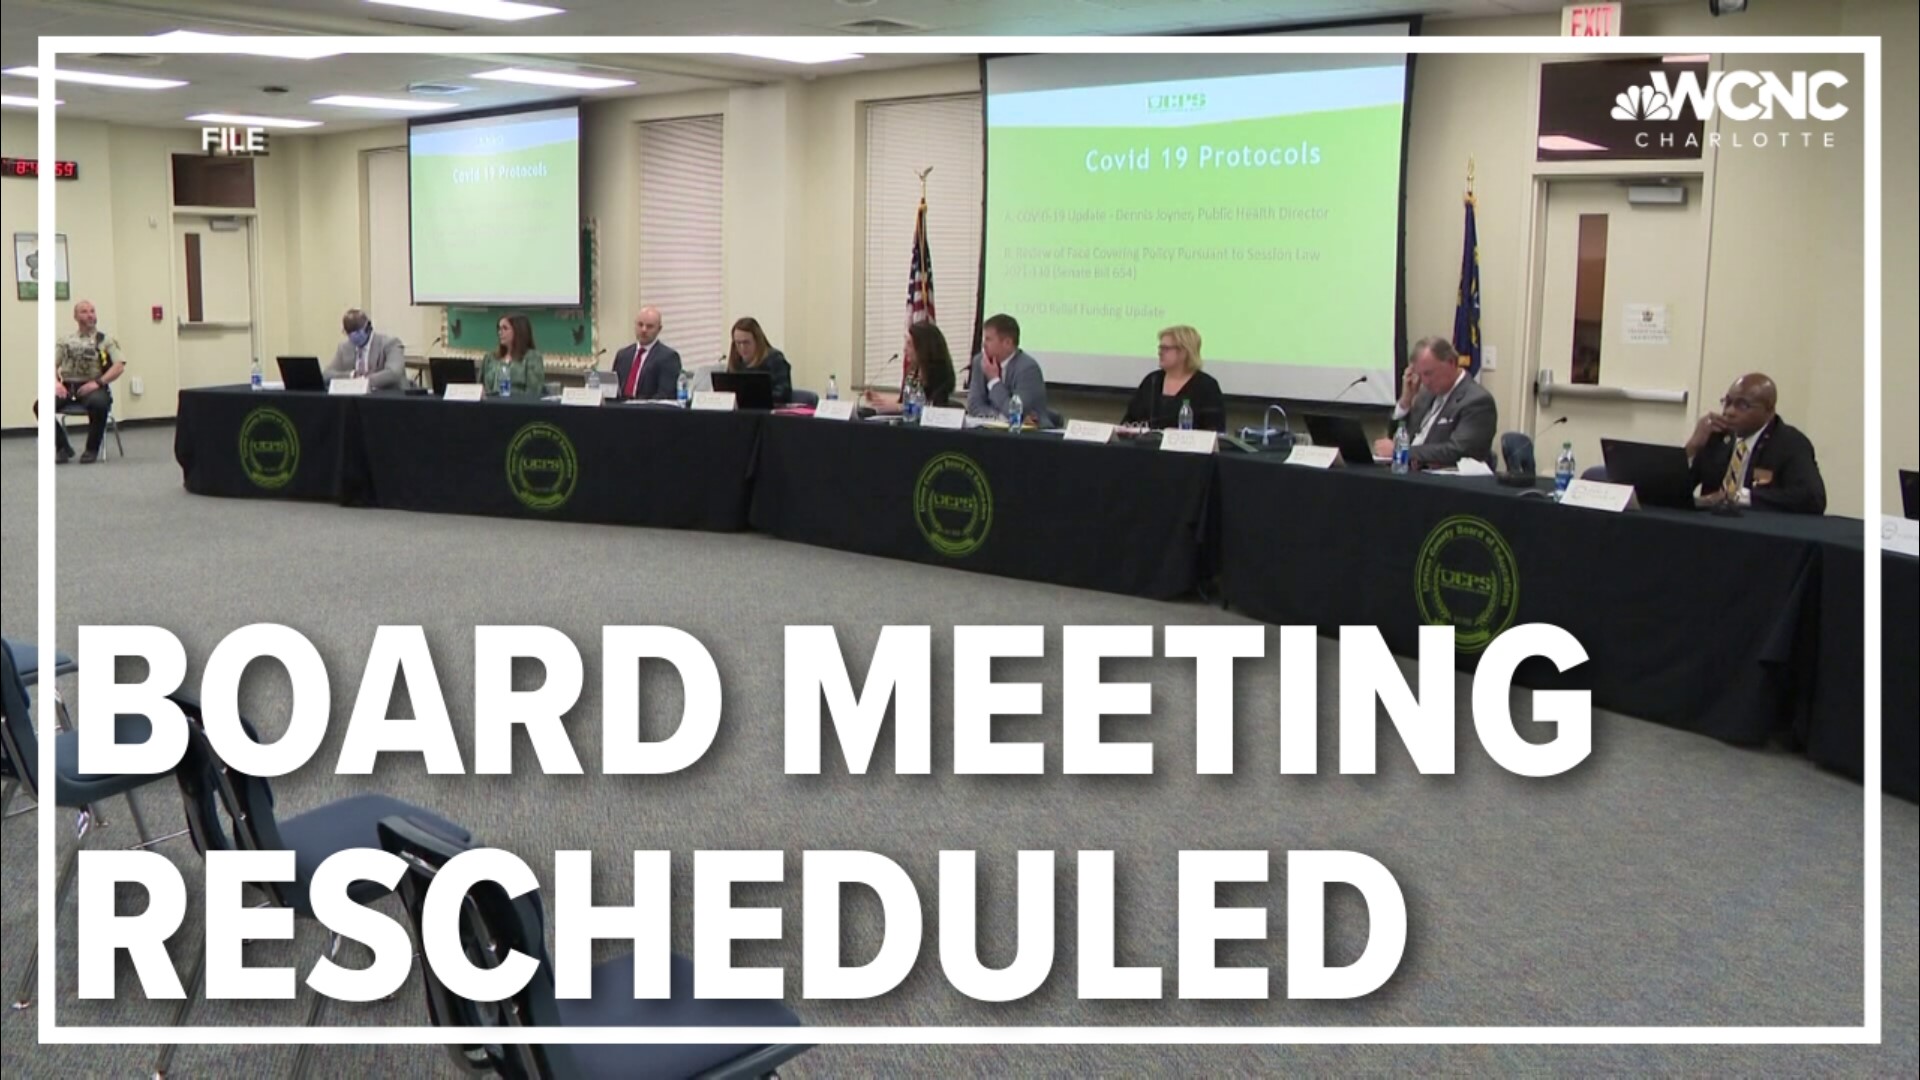 The district is facing lawsuits over an earlier start date to the 2023 - 2024 school year that had been unanimously approved by the board last month.